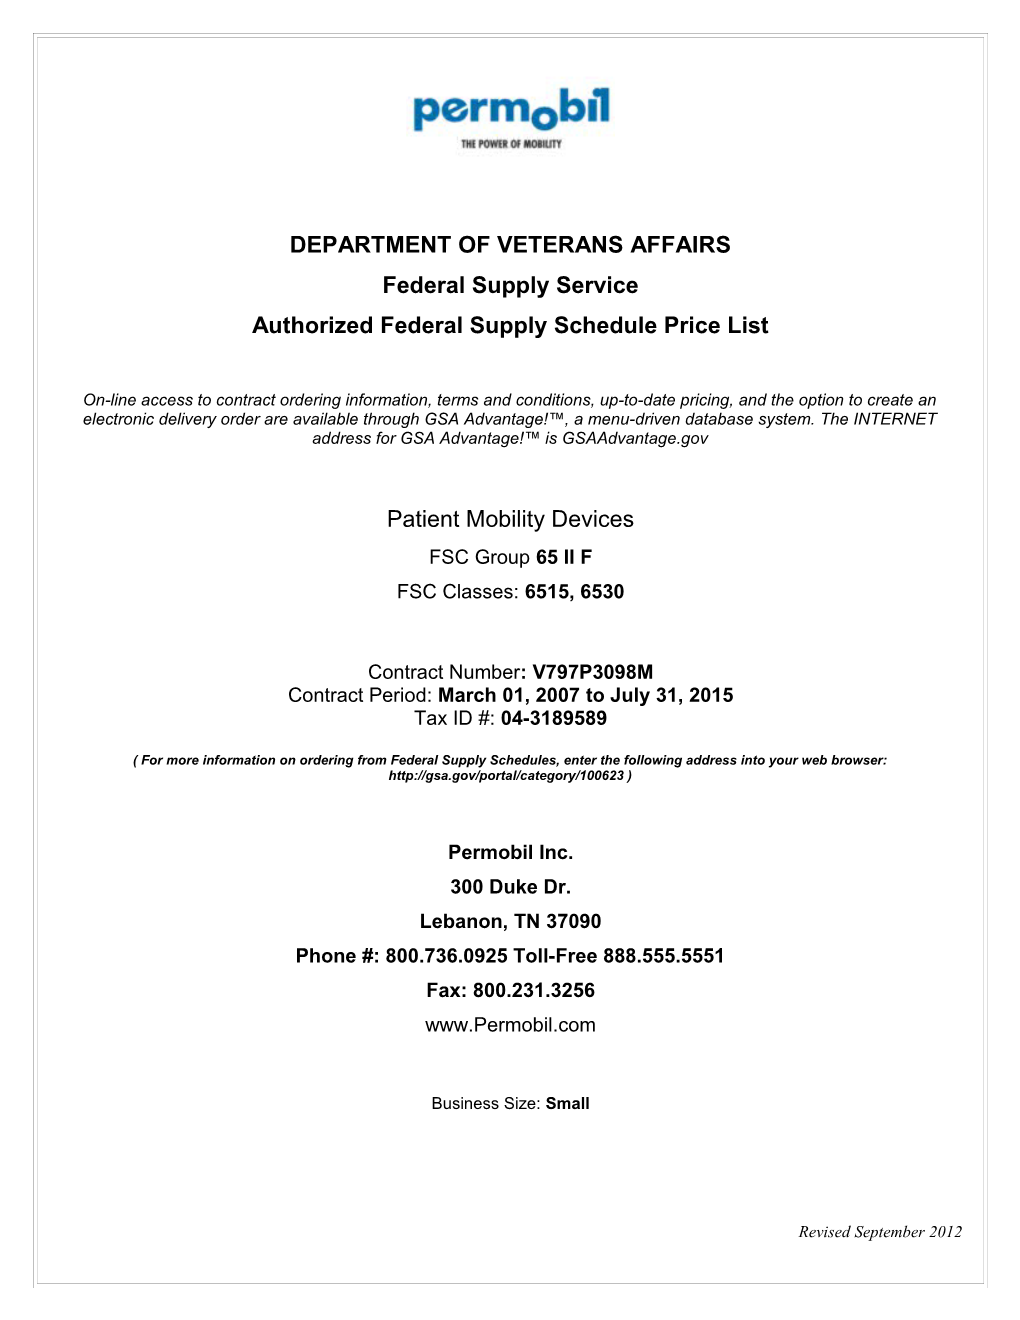 Authorized Federal Supply Schedule Price List s5